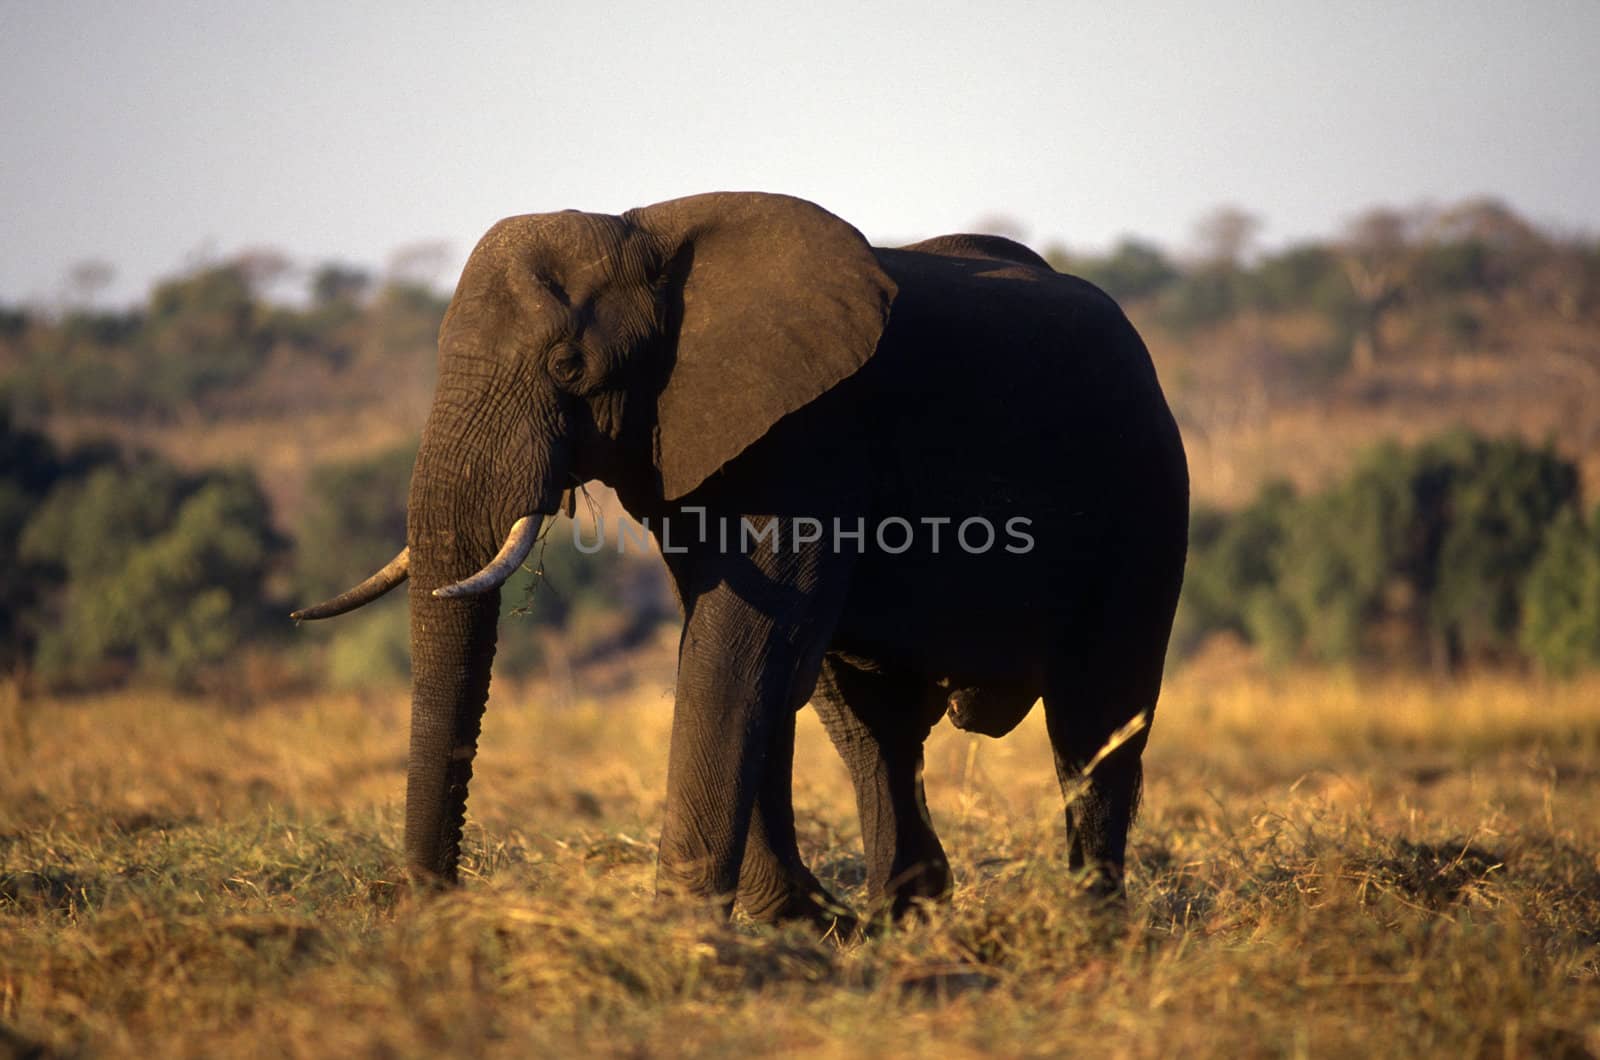 Adult elephant on the plain of brown grass.